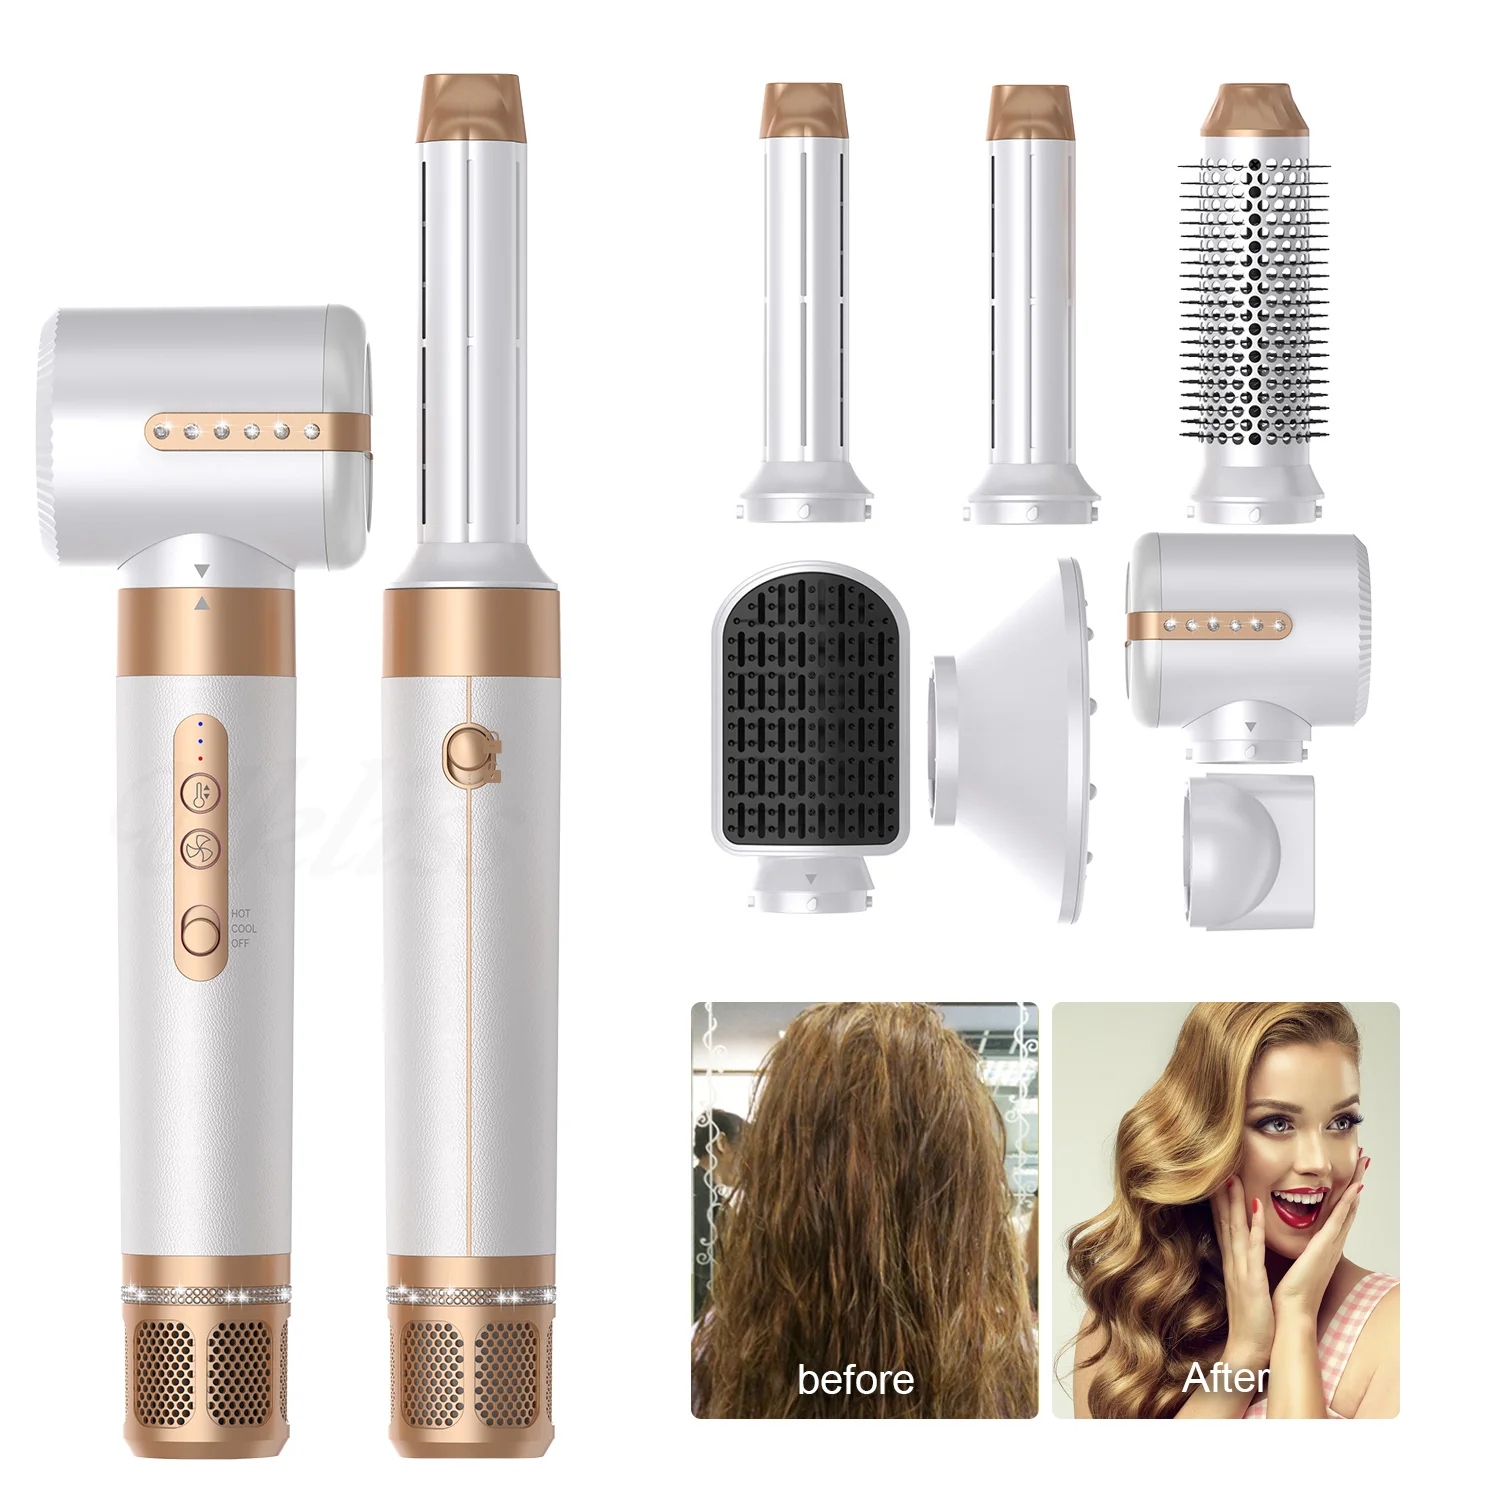 

7 In 1 Hair Dryer Brushless Motor High Speed Hair Dryers Negative Ion Blow Dryer Hot Air Styling Brush Automatic Curling Iron